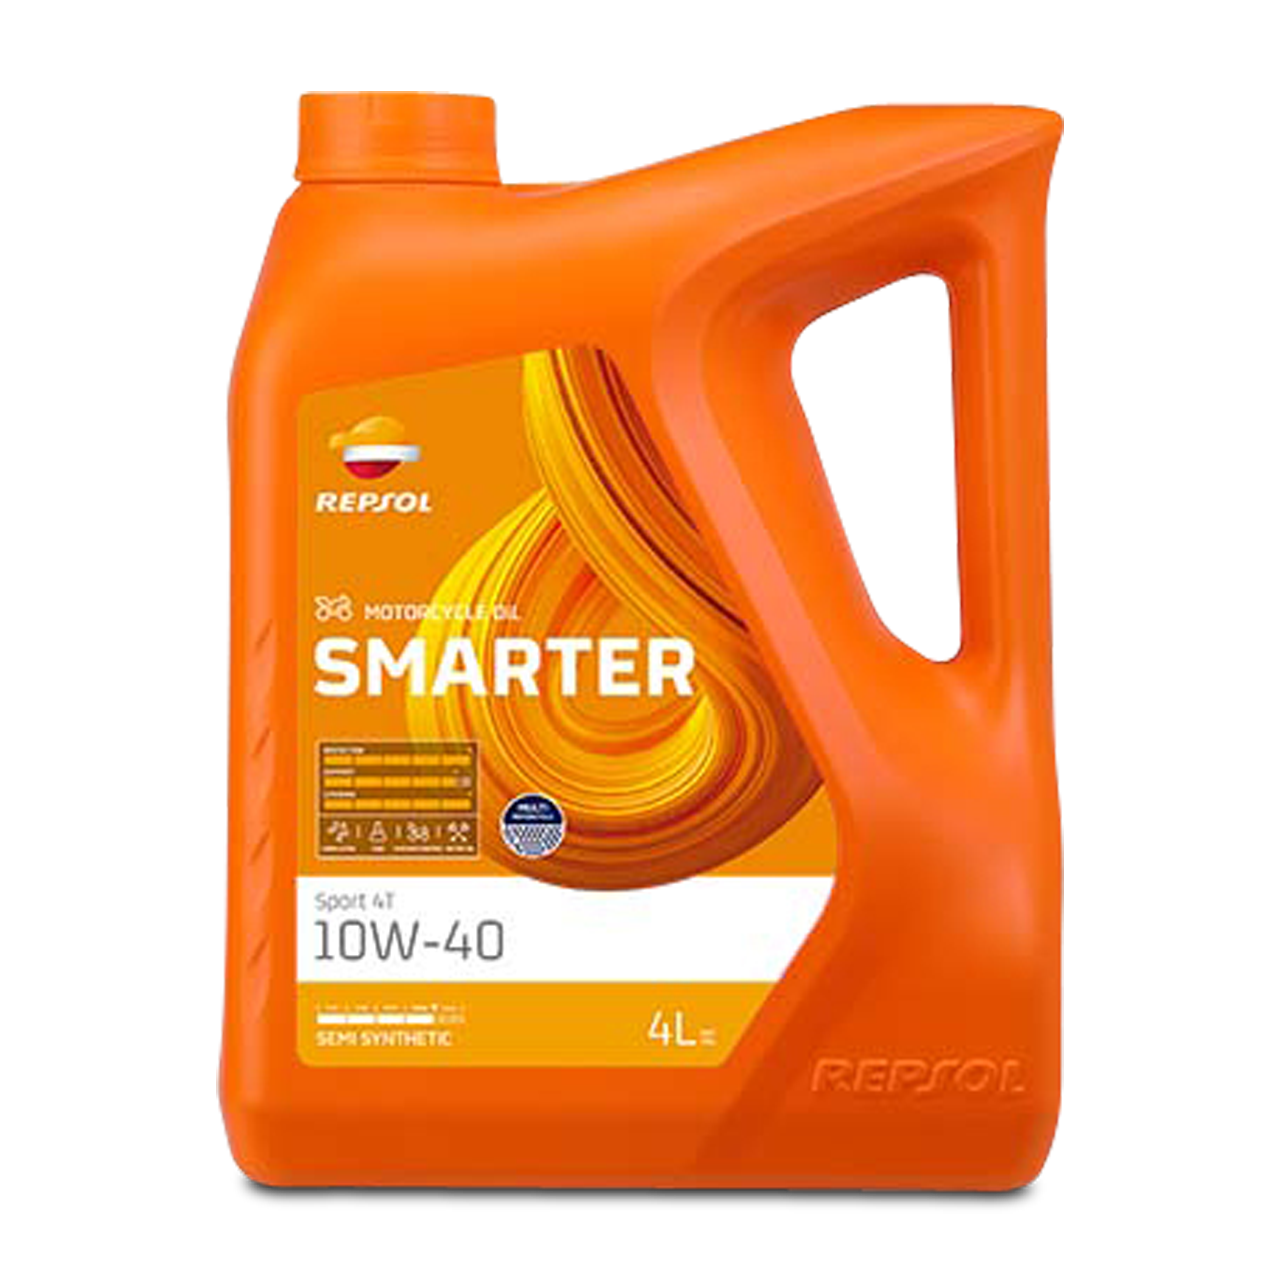 Repsol Smarter Scooter 4T 5W40 1L Engine Oil - Now 20% Savings